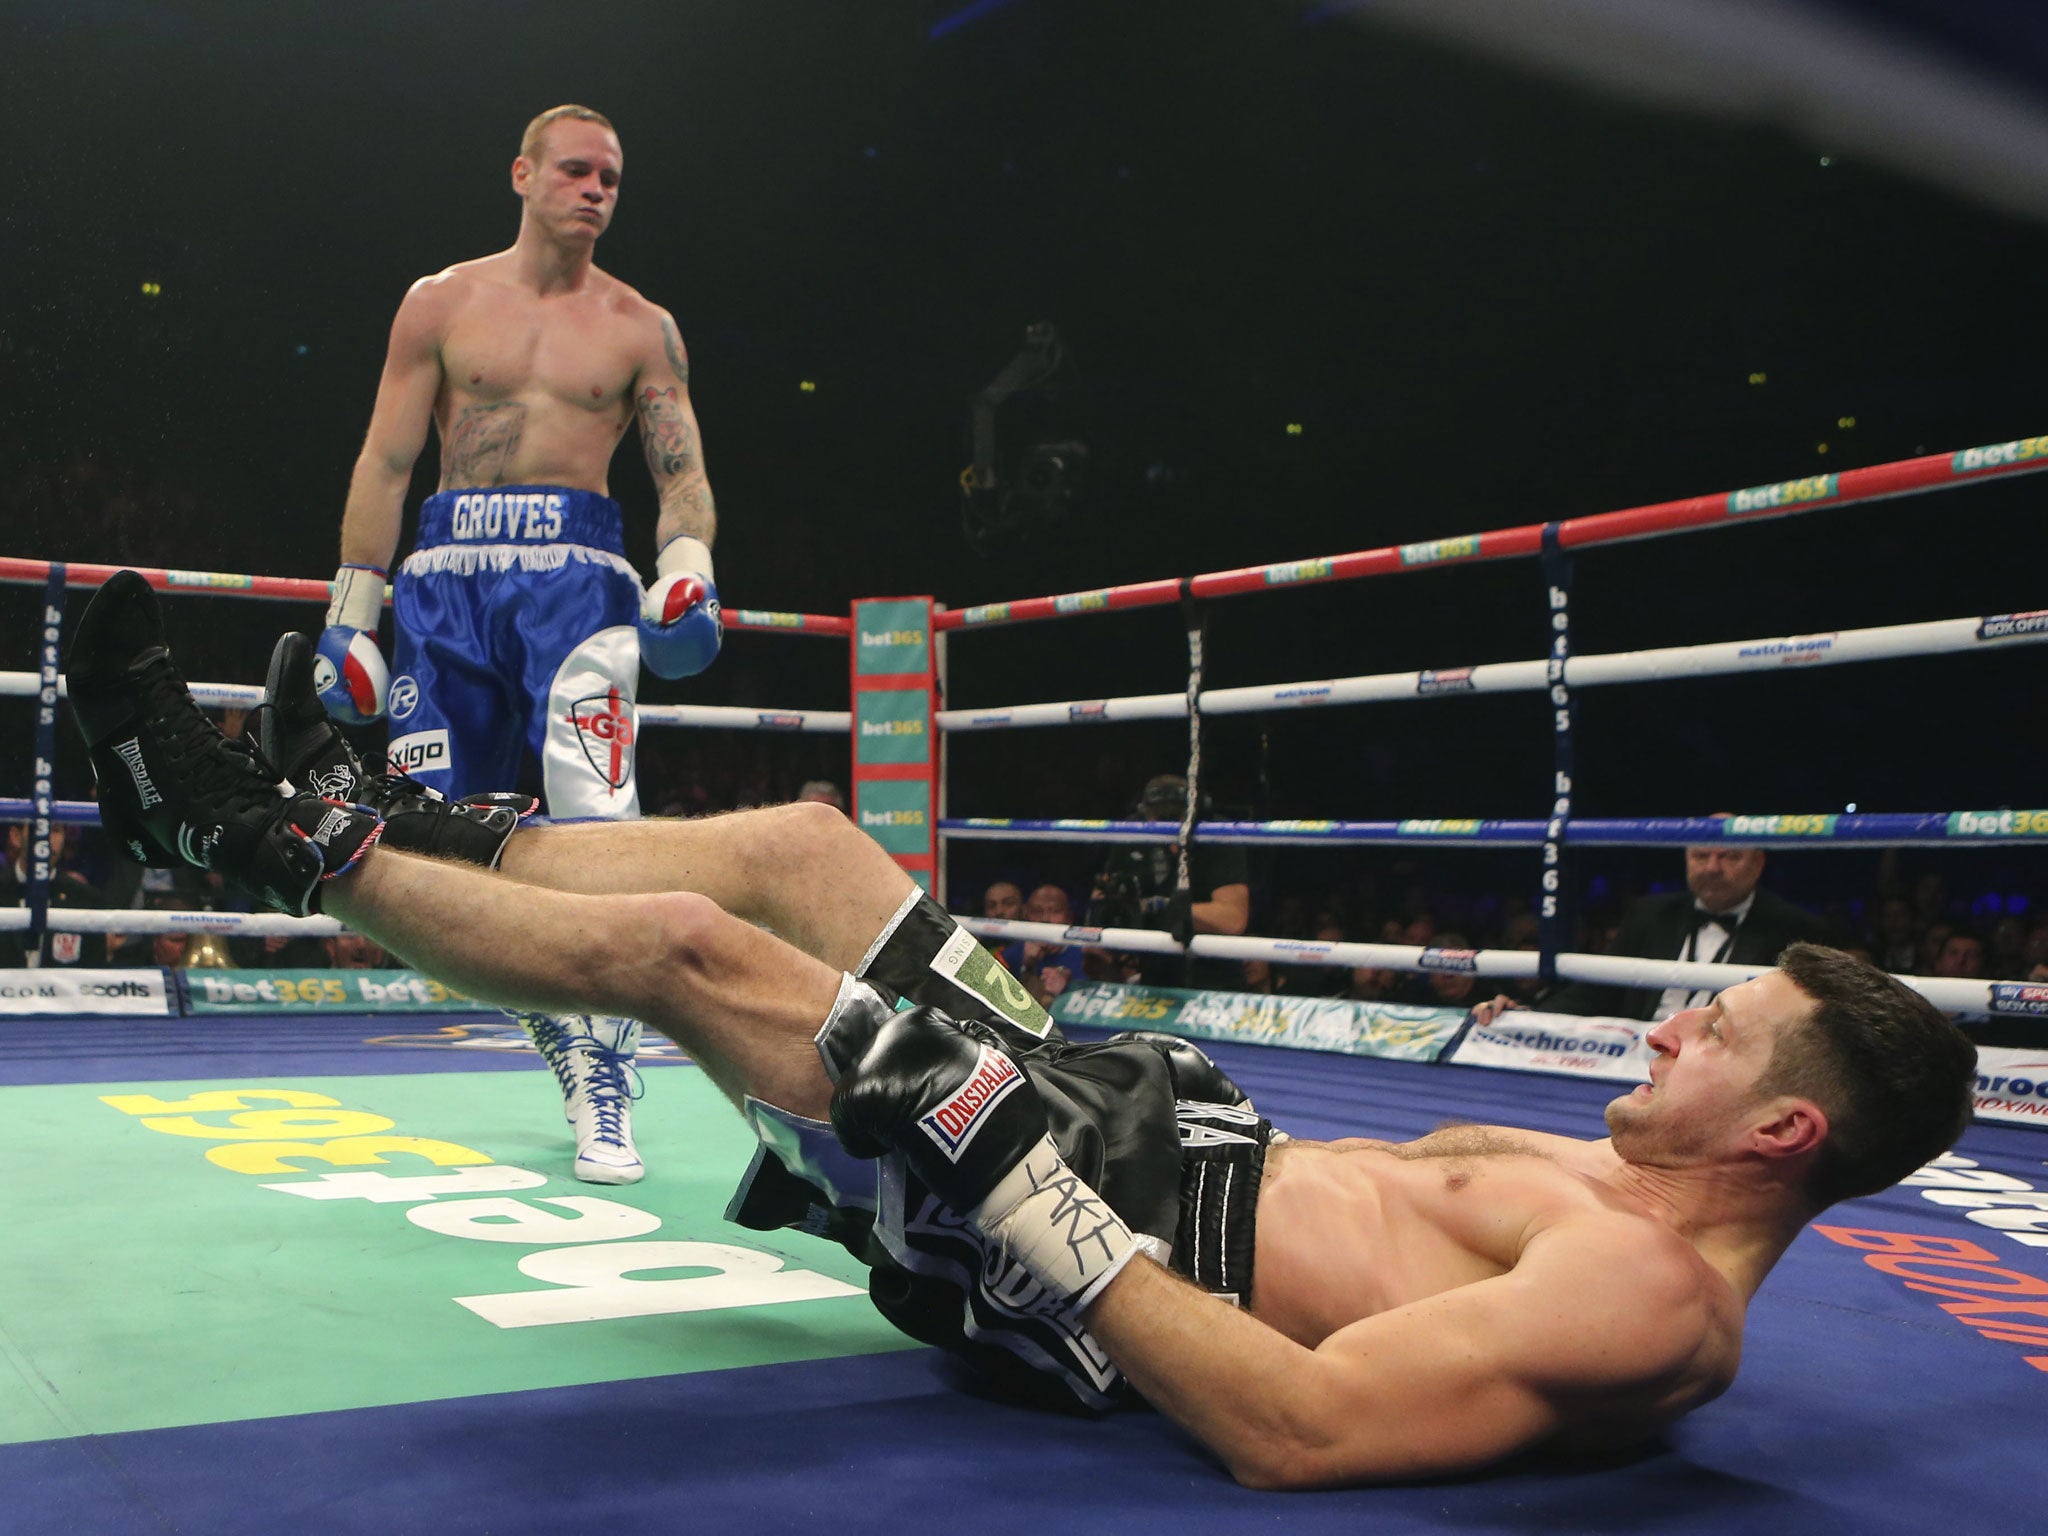 George Groves puts Carl Froch on the canvas during their super-middleweight title fight